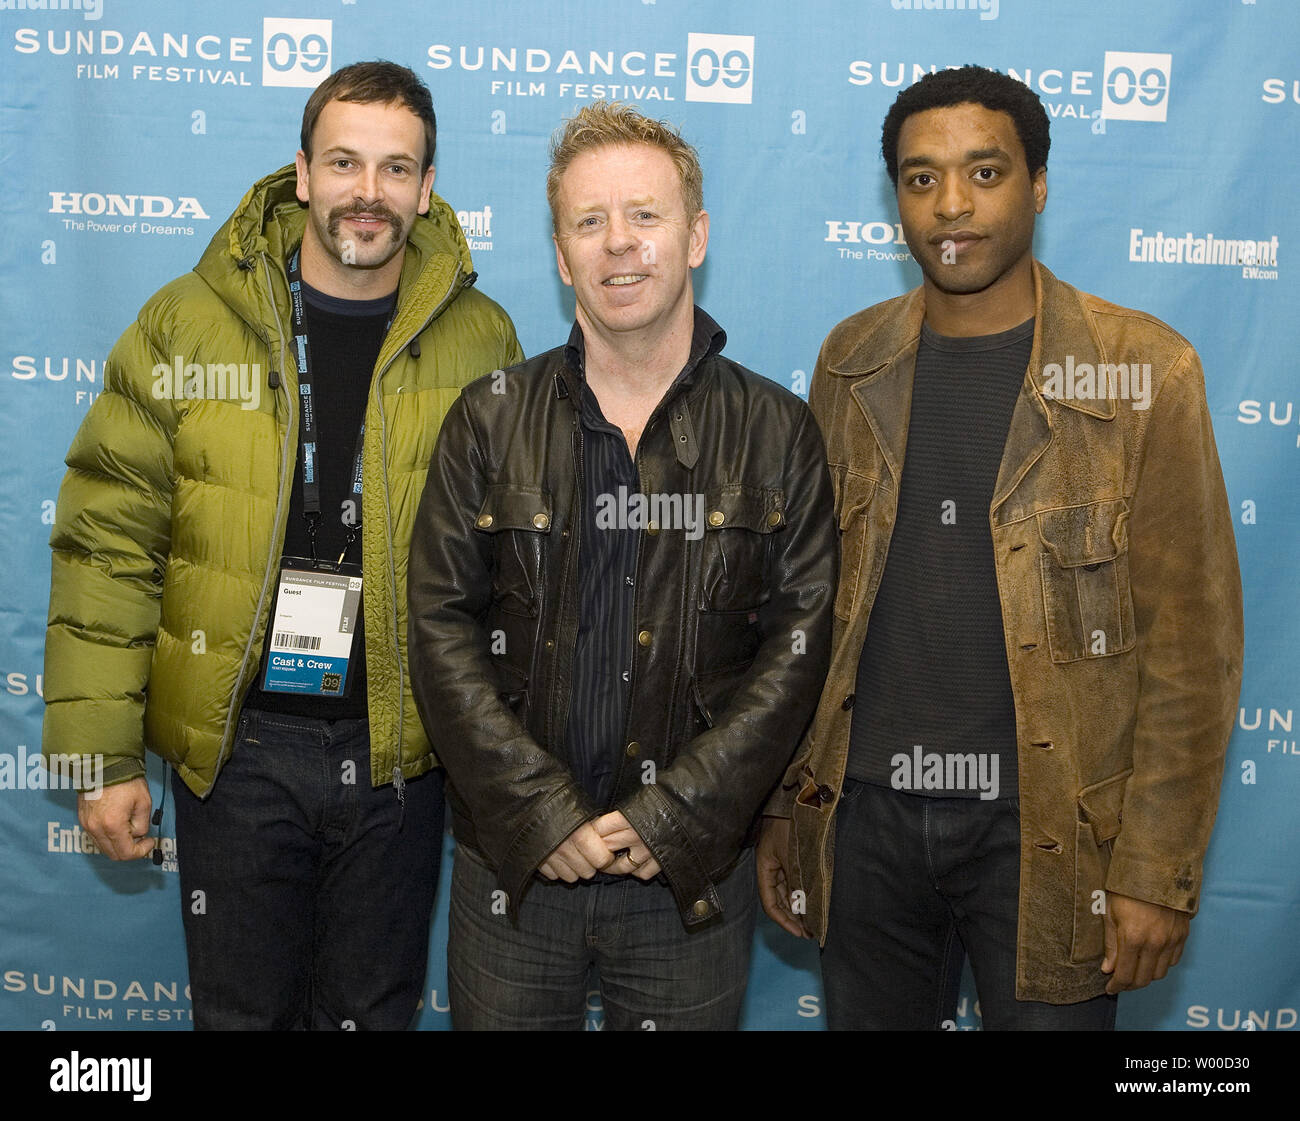 (L-R) Johnny Lee Miller, Director Pete Travis, and Chiwetel Ejiofor attend the premiere of 'Endgame' at the 2009 Sundance Film Festival in Park City, Utah on January 18, 2009. The festival is celebrating its 25th anniversary.   (UPI Photo/Gary C. Caskey) Stock Photo